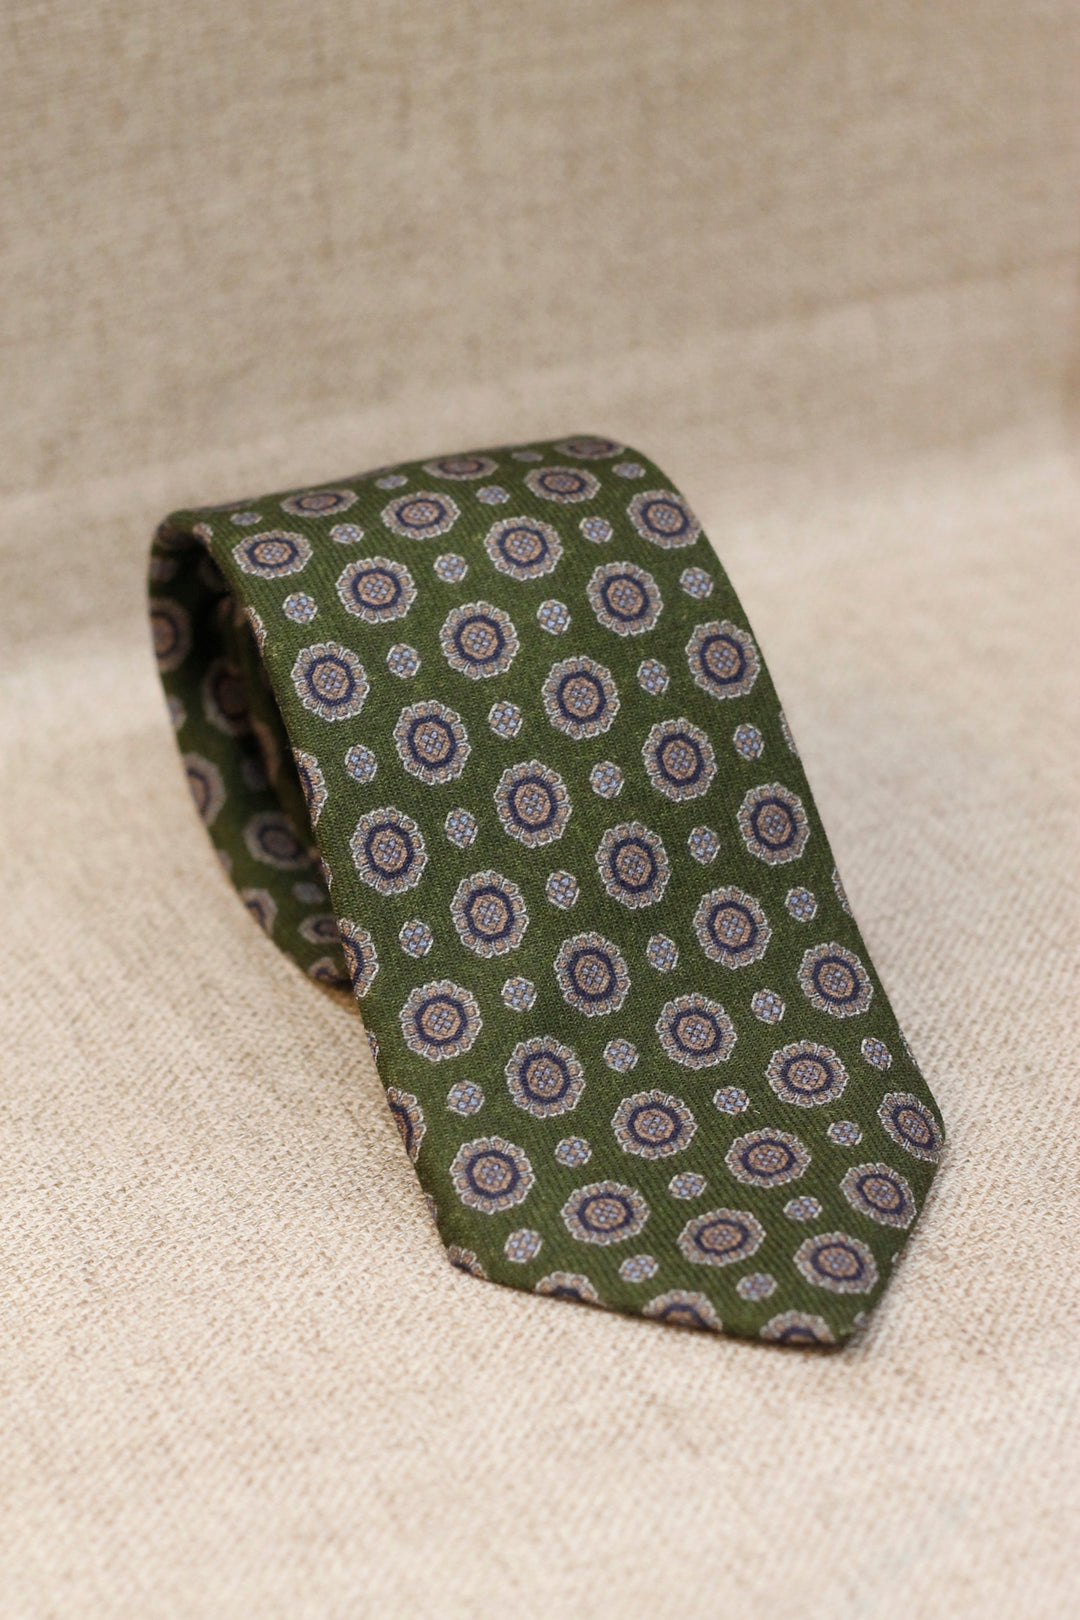 Napoli WOOL Tie Olive Green Octagonal Medallion Blue Tones and Sawdust